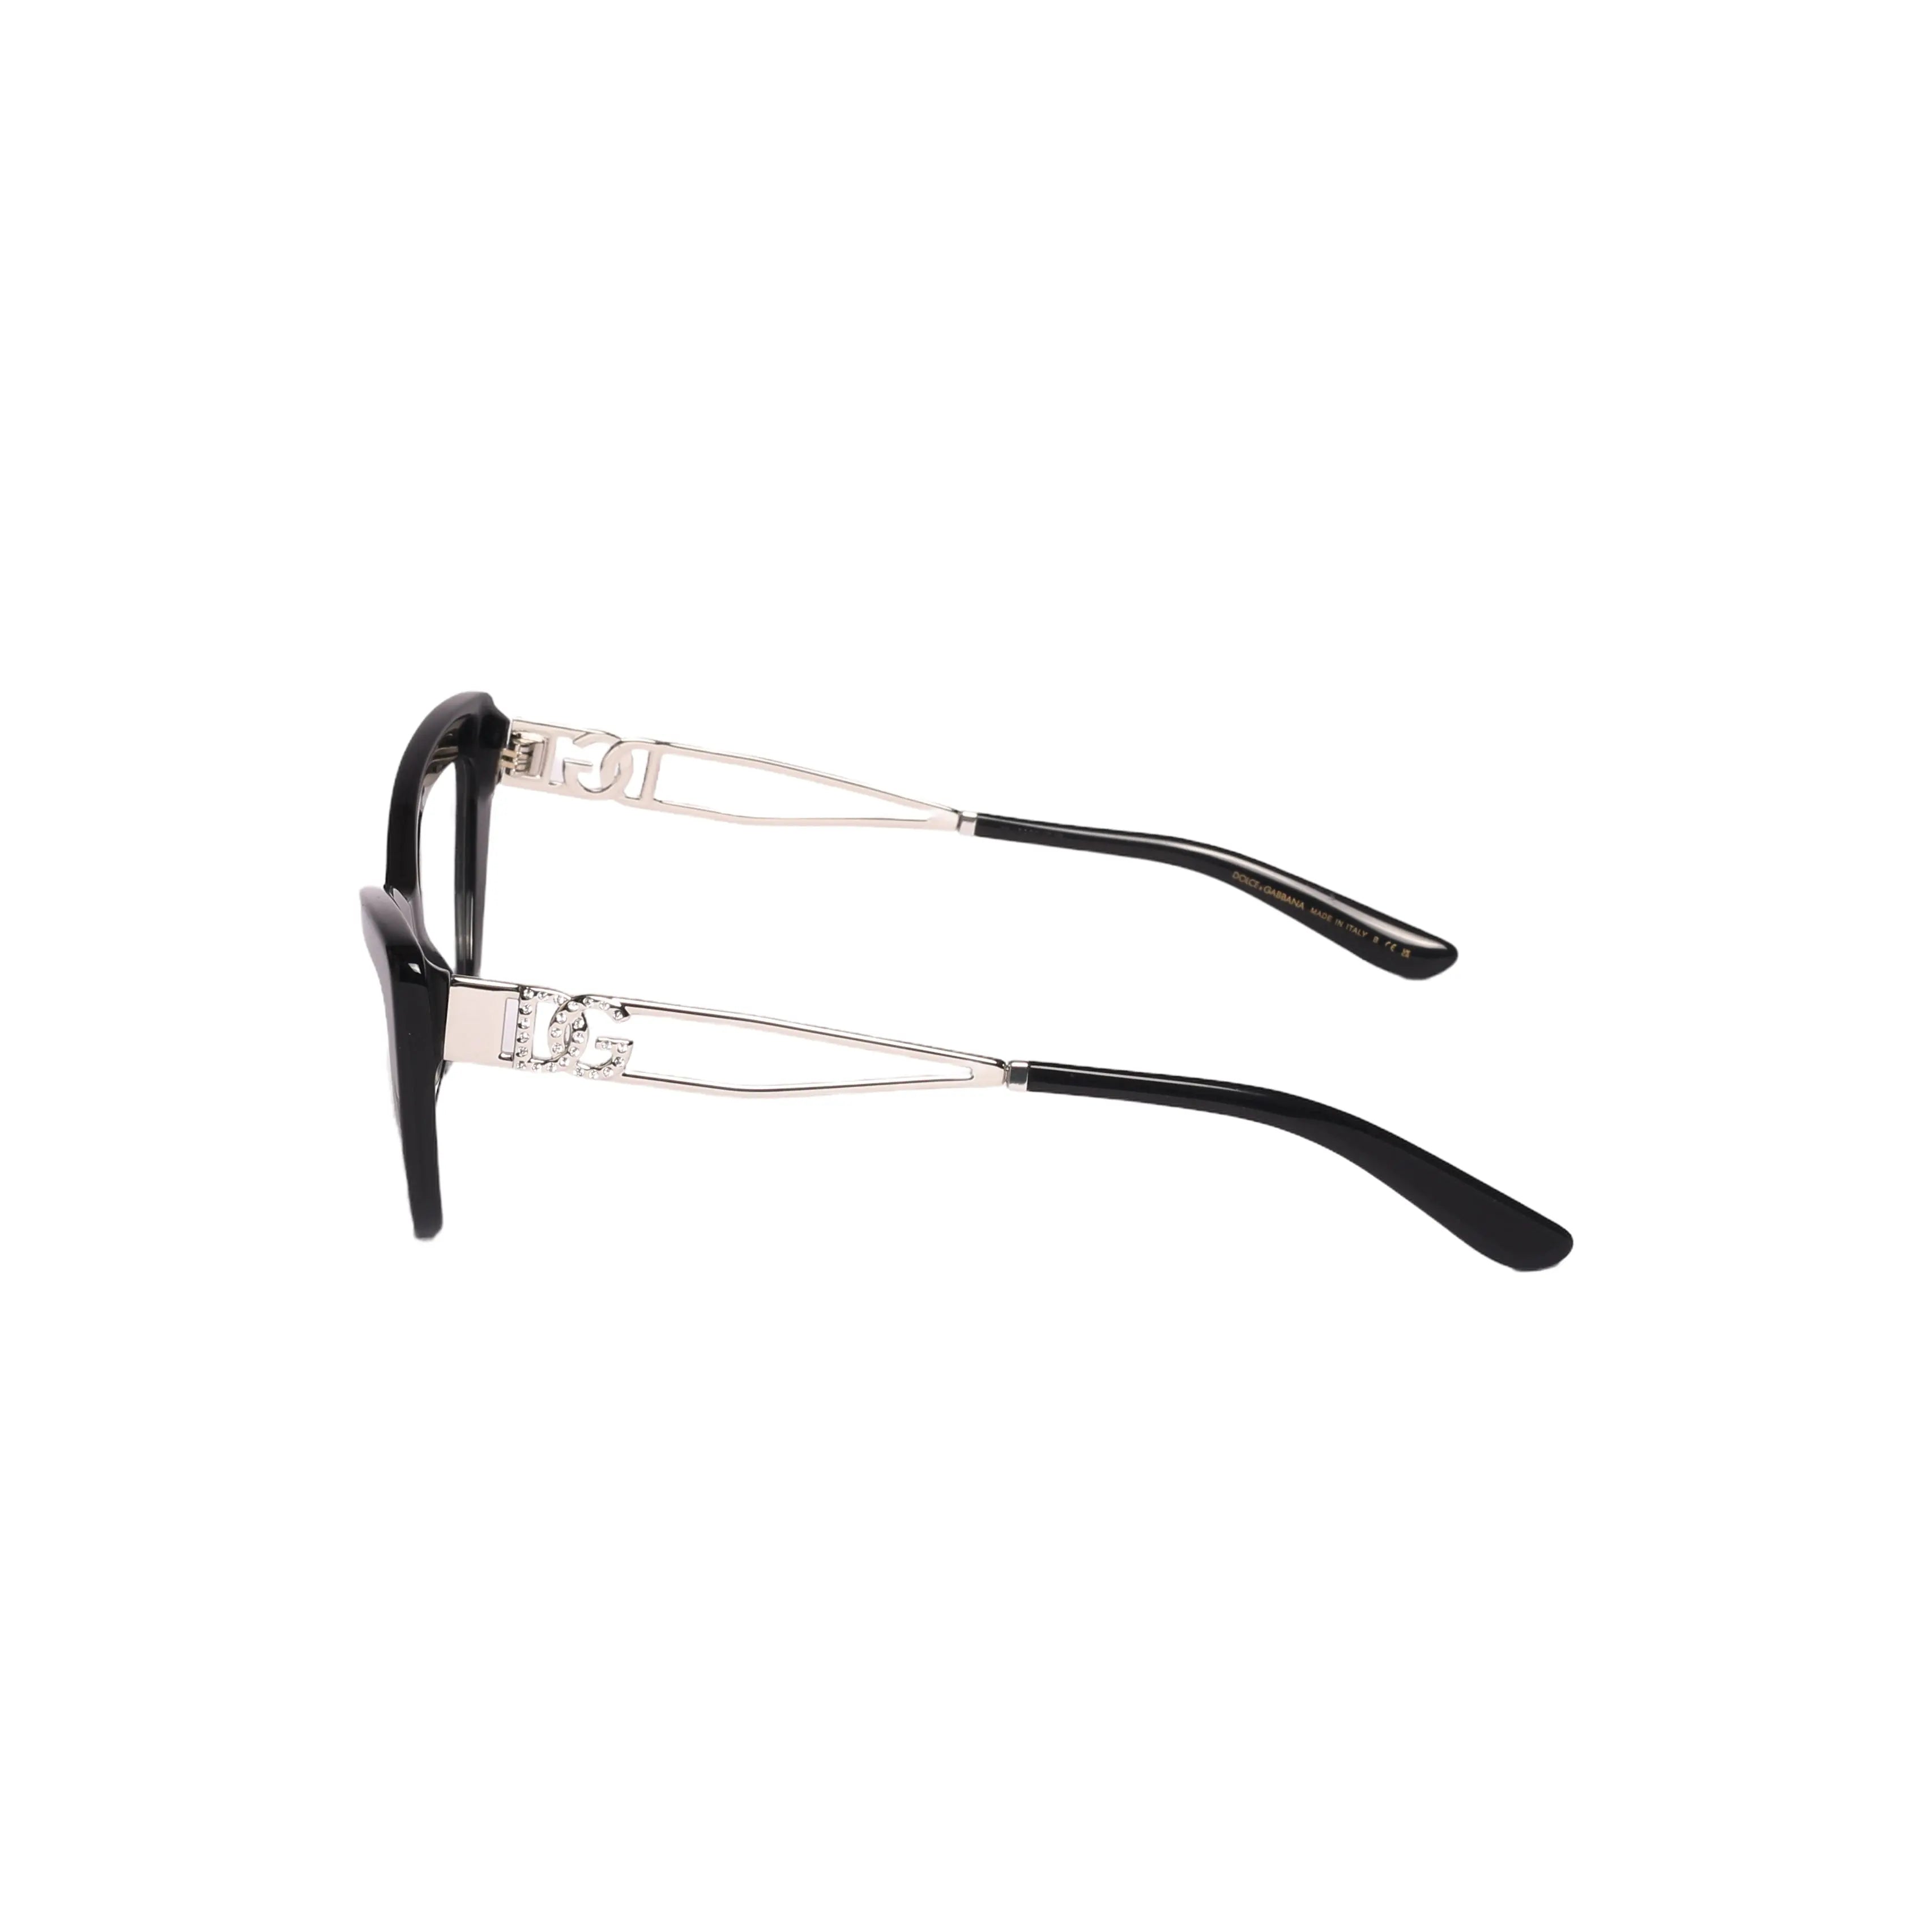 Dolce & Gabbana (D&G) DG 3375B-53-5015 EyeglassesFeel elegant and stylish in Dolce &amp; Gabbana (D&amp;G) DG 3375B-53-5015 Eyeglasses. These glasses offer a unique, cutting-edge style that will turn heads and makeEyeglasses